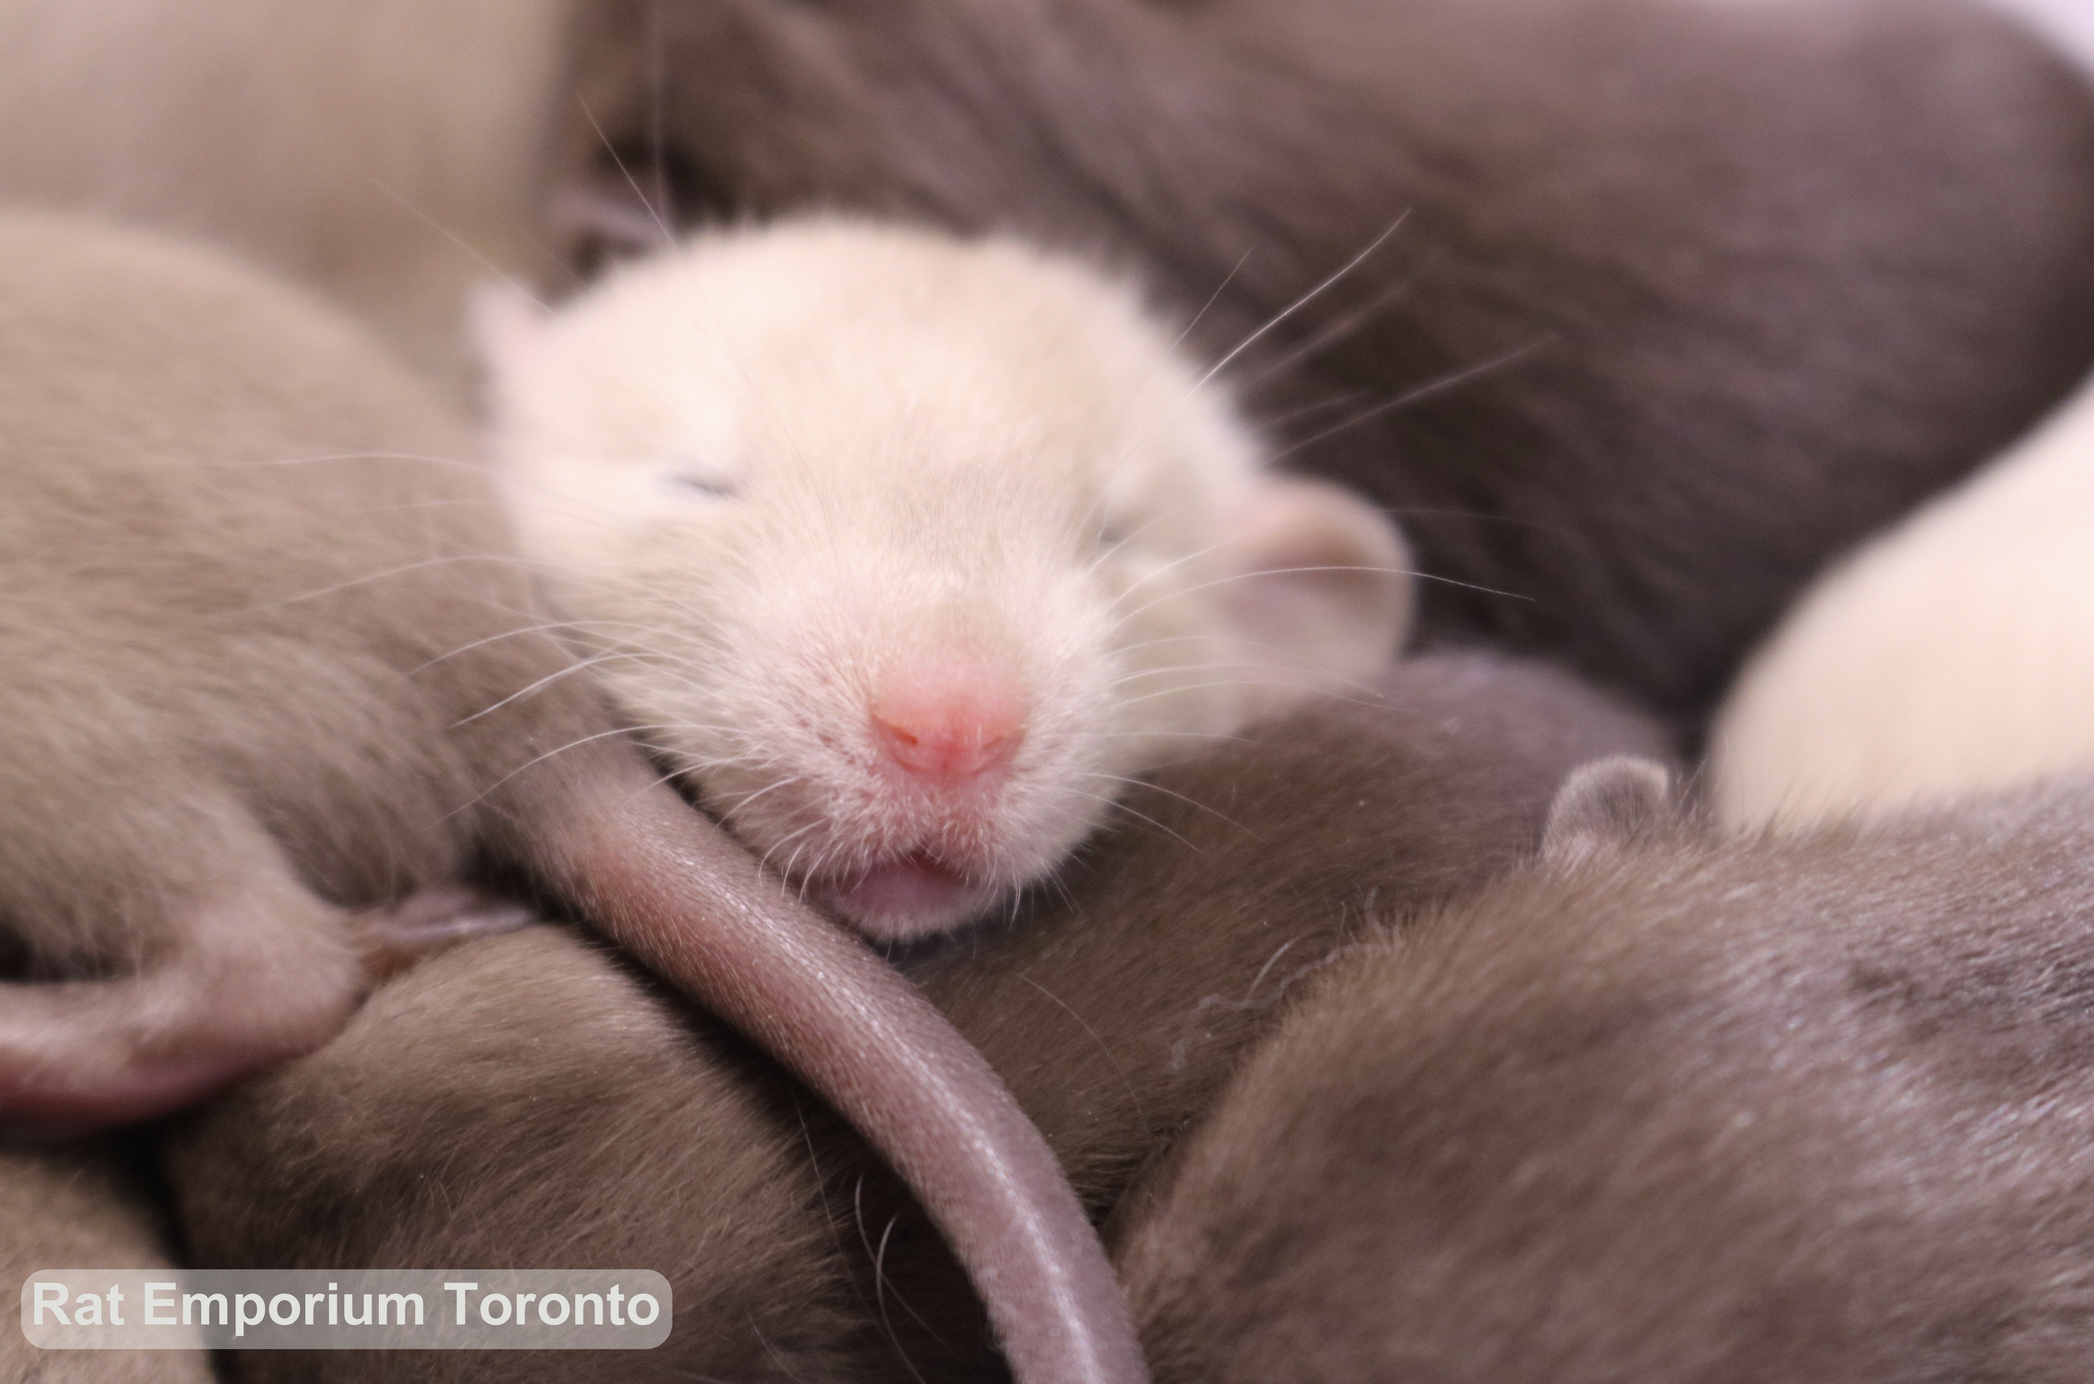 baby siamese and sable rats, dumbo and top ear bred at the Rat Emporium Toronto